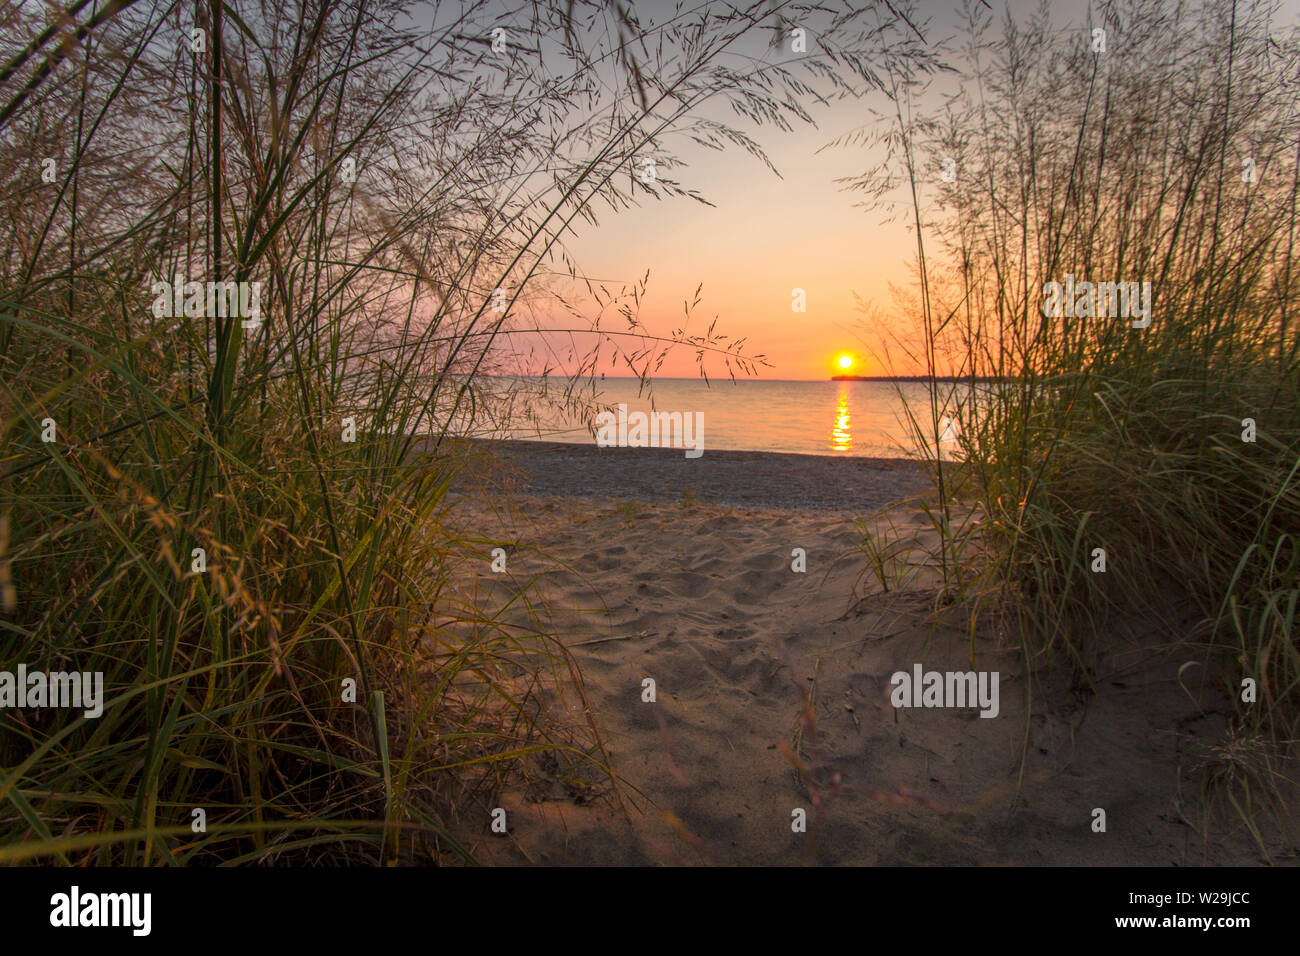 Sunset Trail. Sandy beach with trail through dune grass and setting sun over the water. Lighthouse Beach, Port Huron, Michigan. Stock Photo